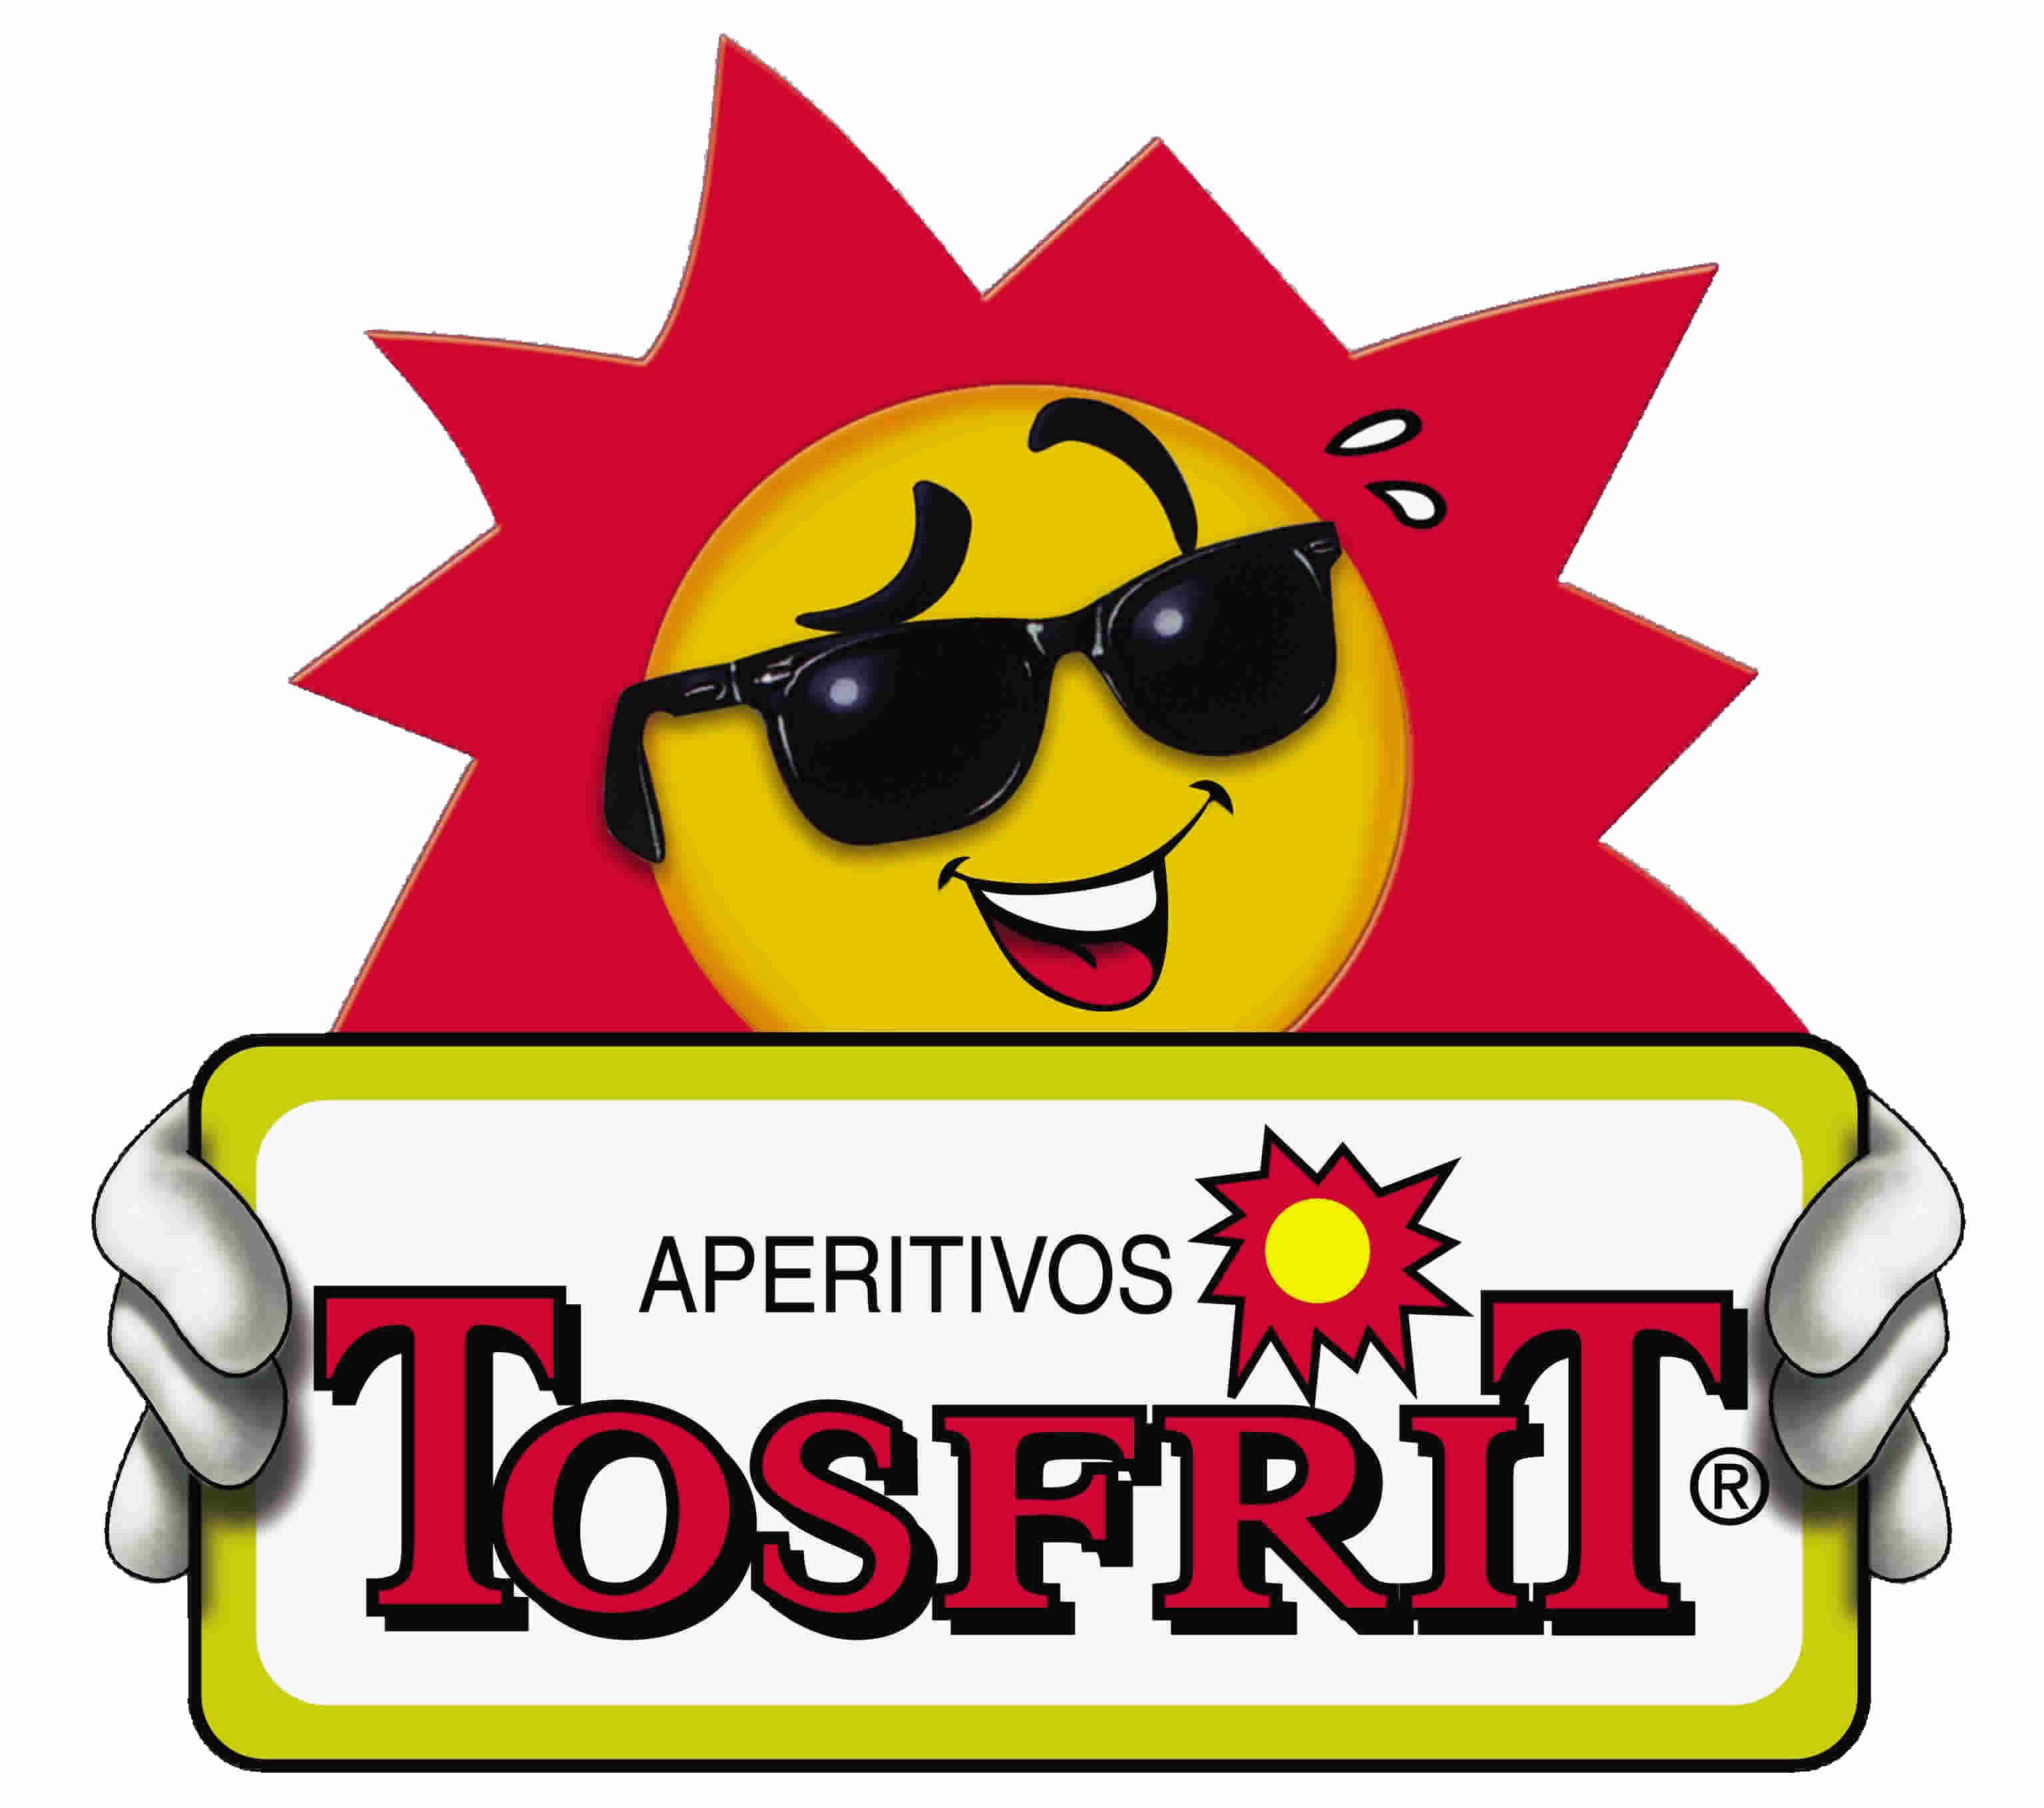 TOSFRIT